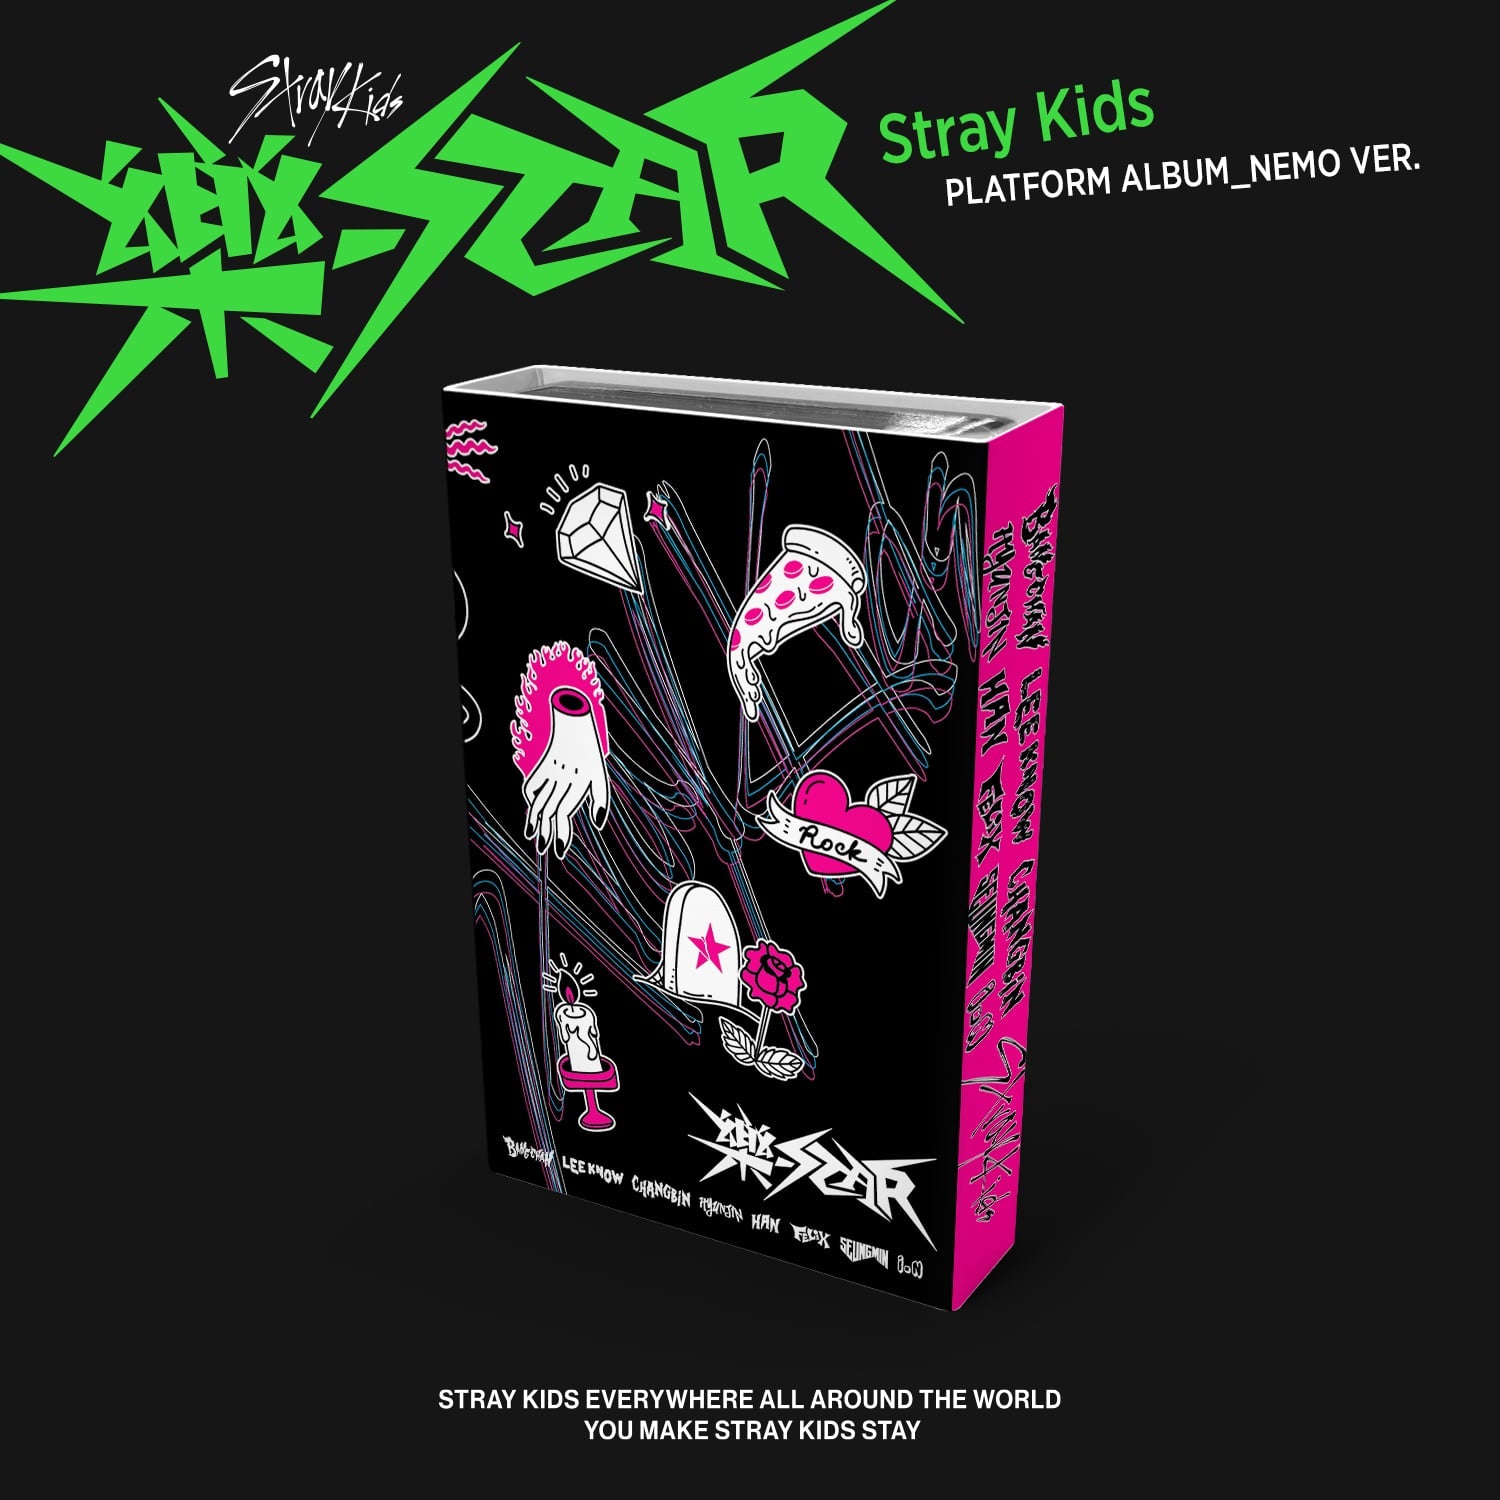 US Free Shipping] Stray Kids - (5-STAR) The 3rd Album [Standard